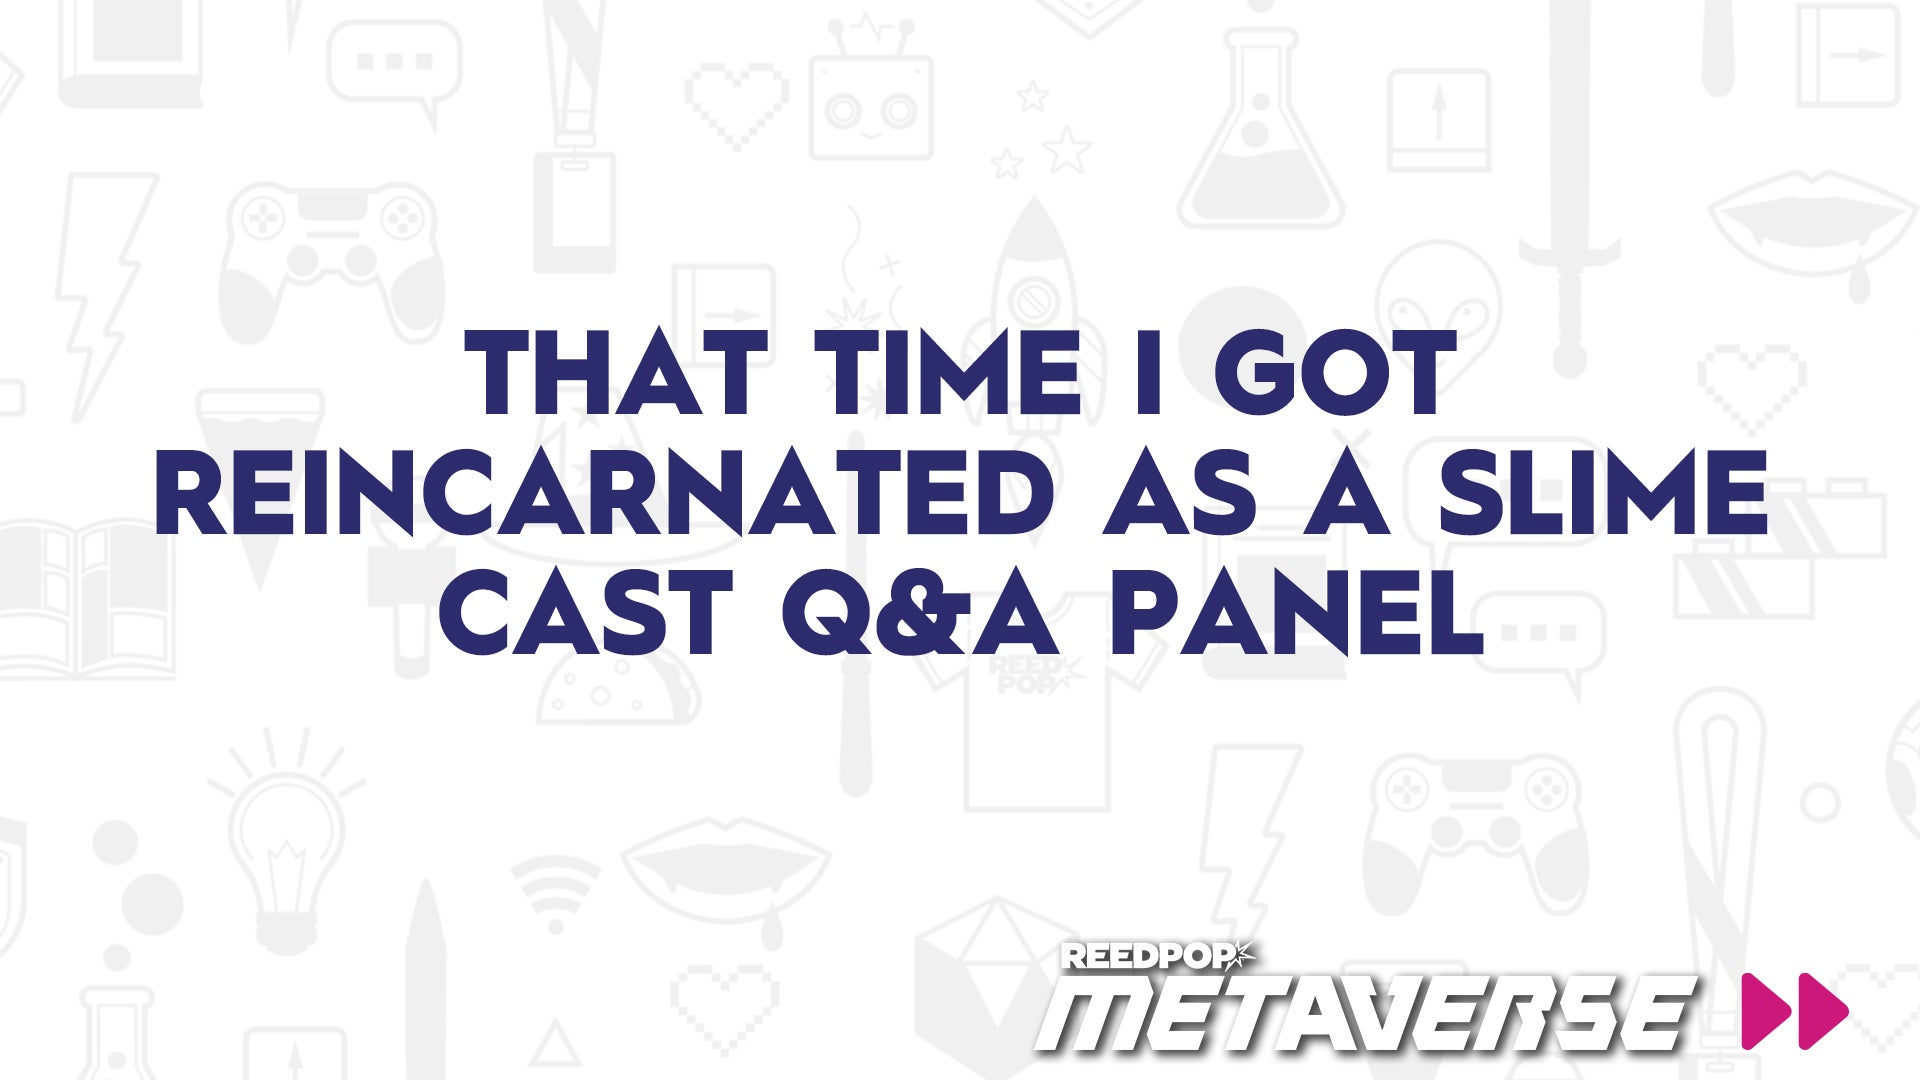 Image for That Time I Got Reincarnated as a Slime Cast Q&A Panel